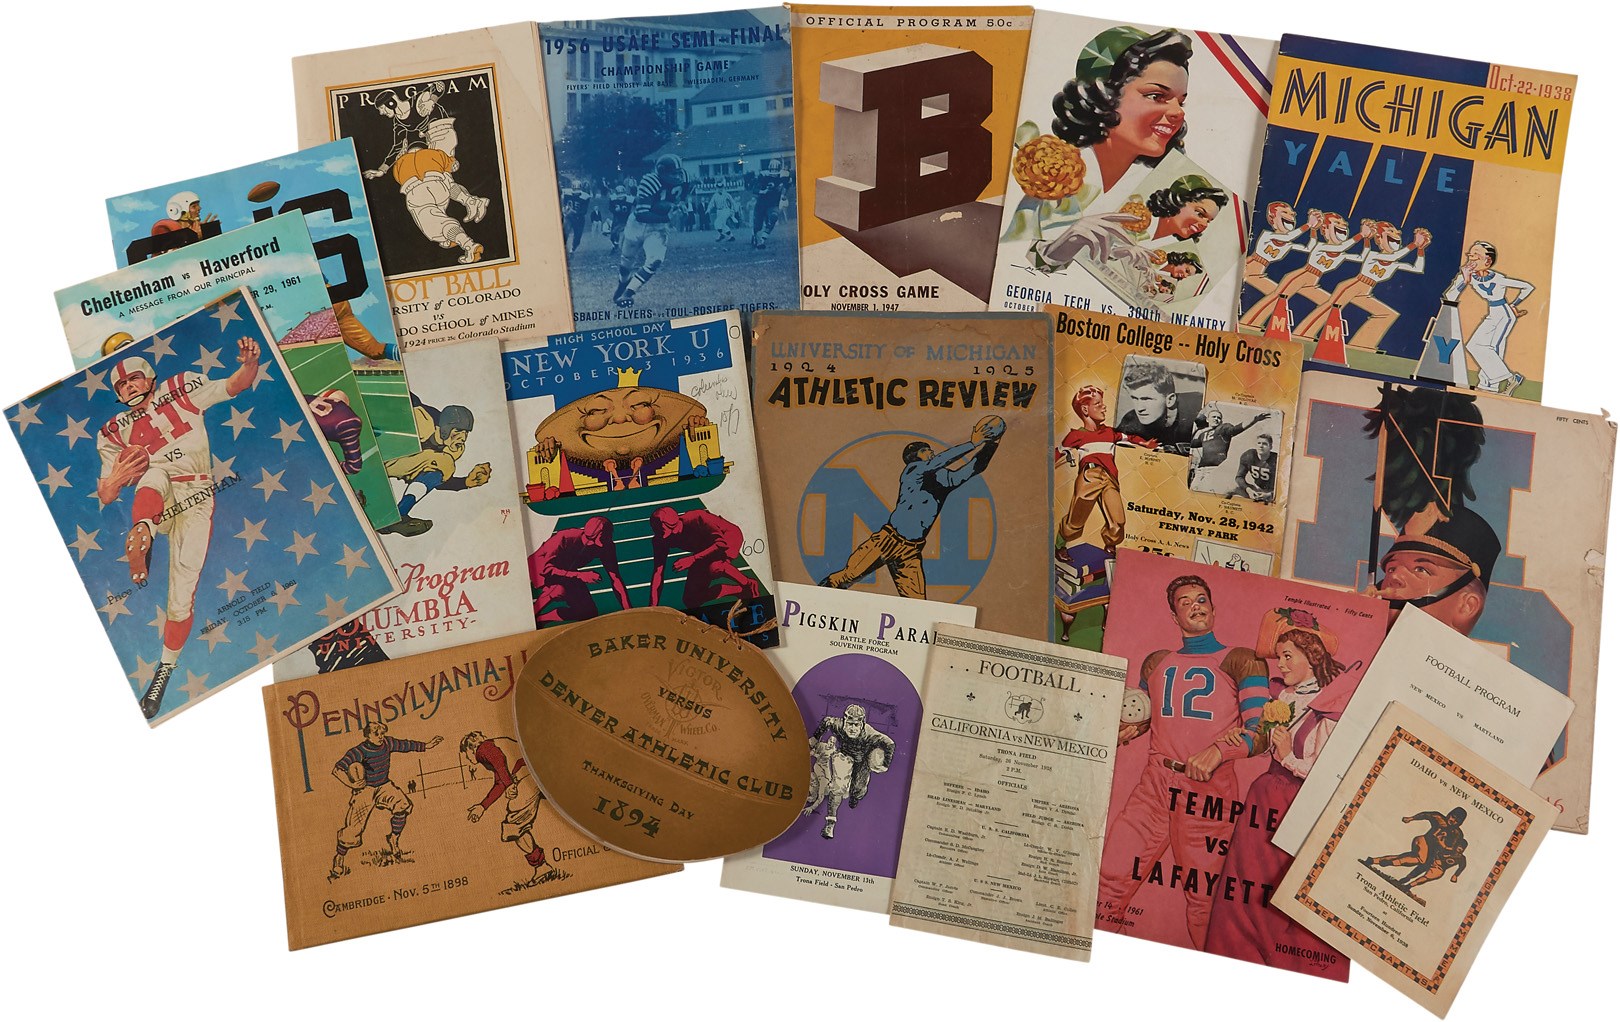 The Ivy League And Collegiate Program Archive - 1894-1960s College Football Program Collection (15+)